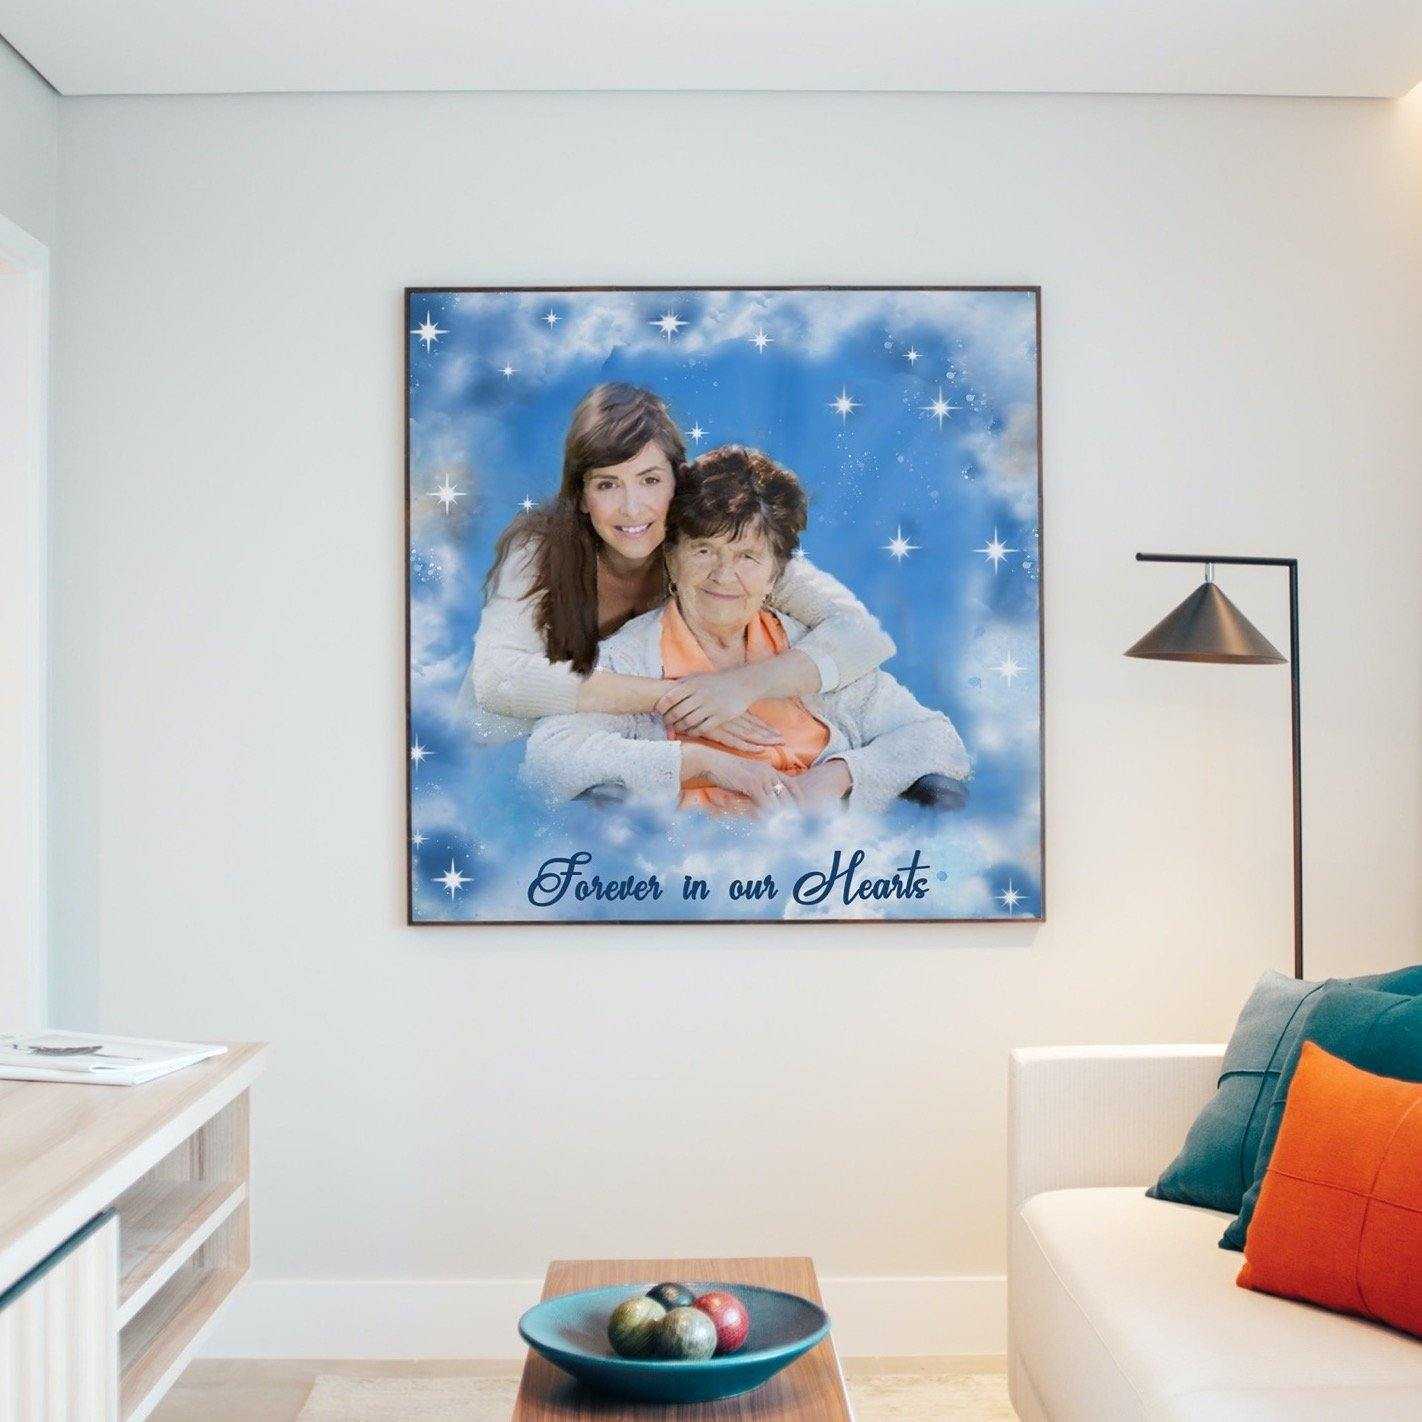 Personalized Family Painting, Personalized Family Portrait from Photo, Watercolor Painting from Photo - FromPicToArt